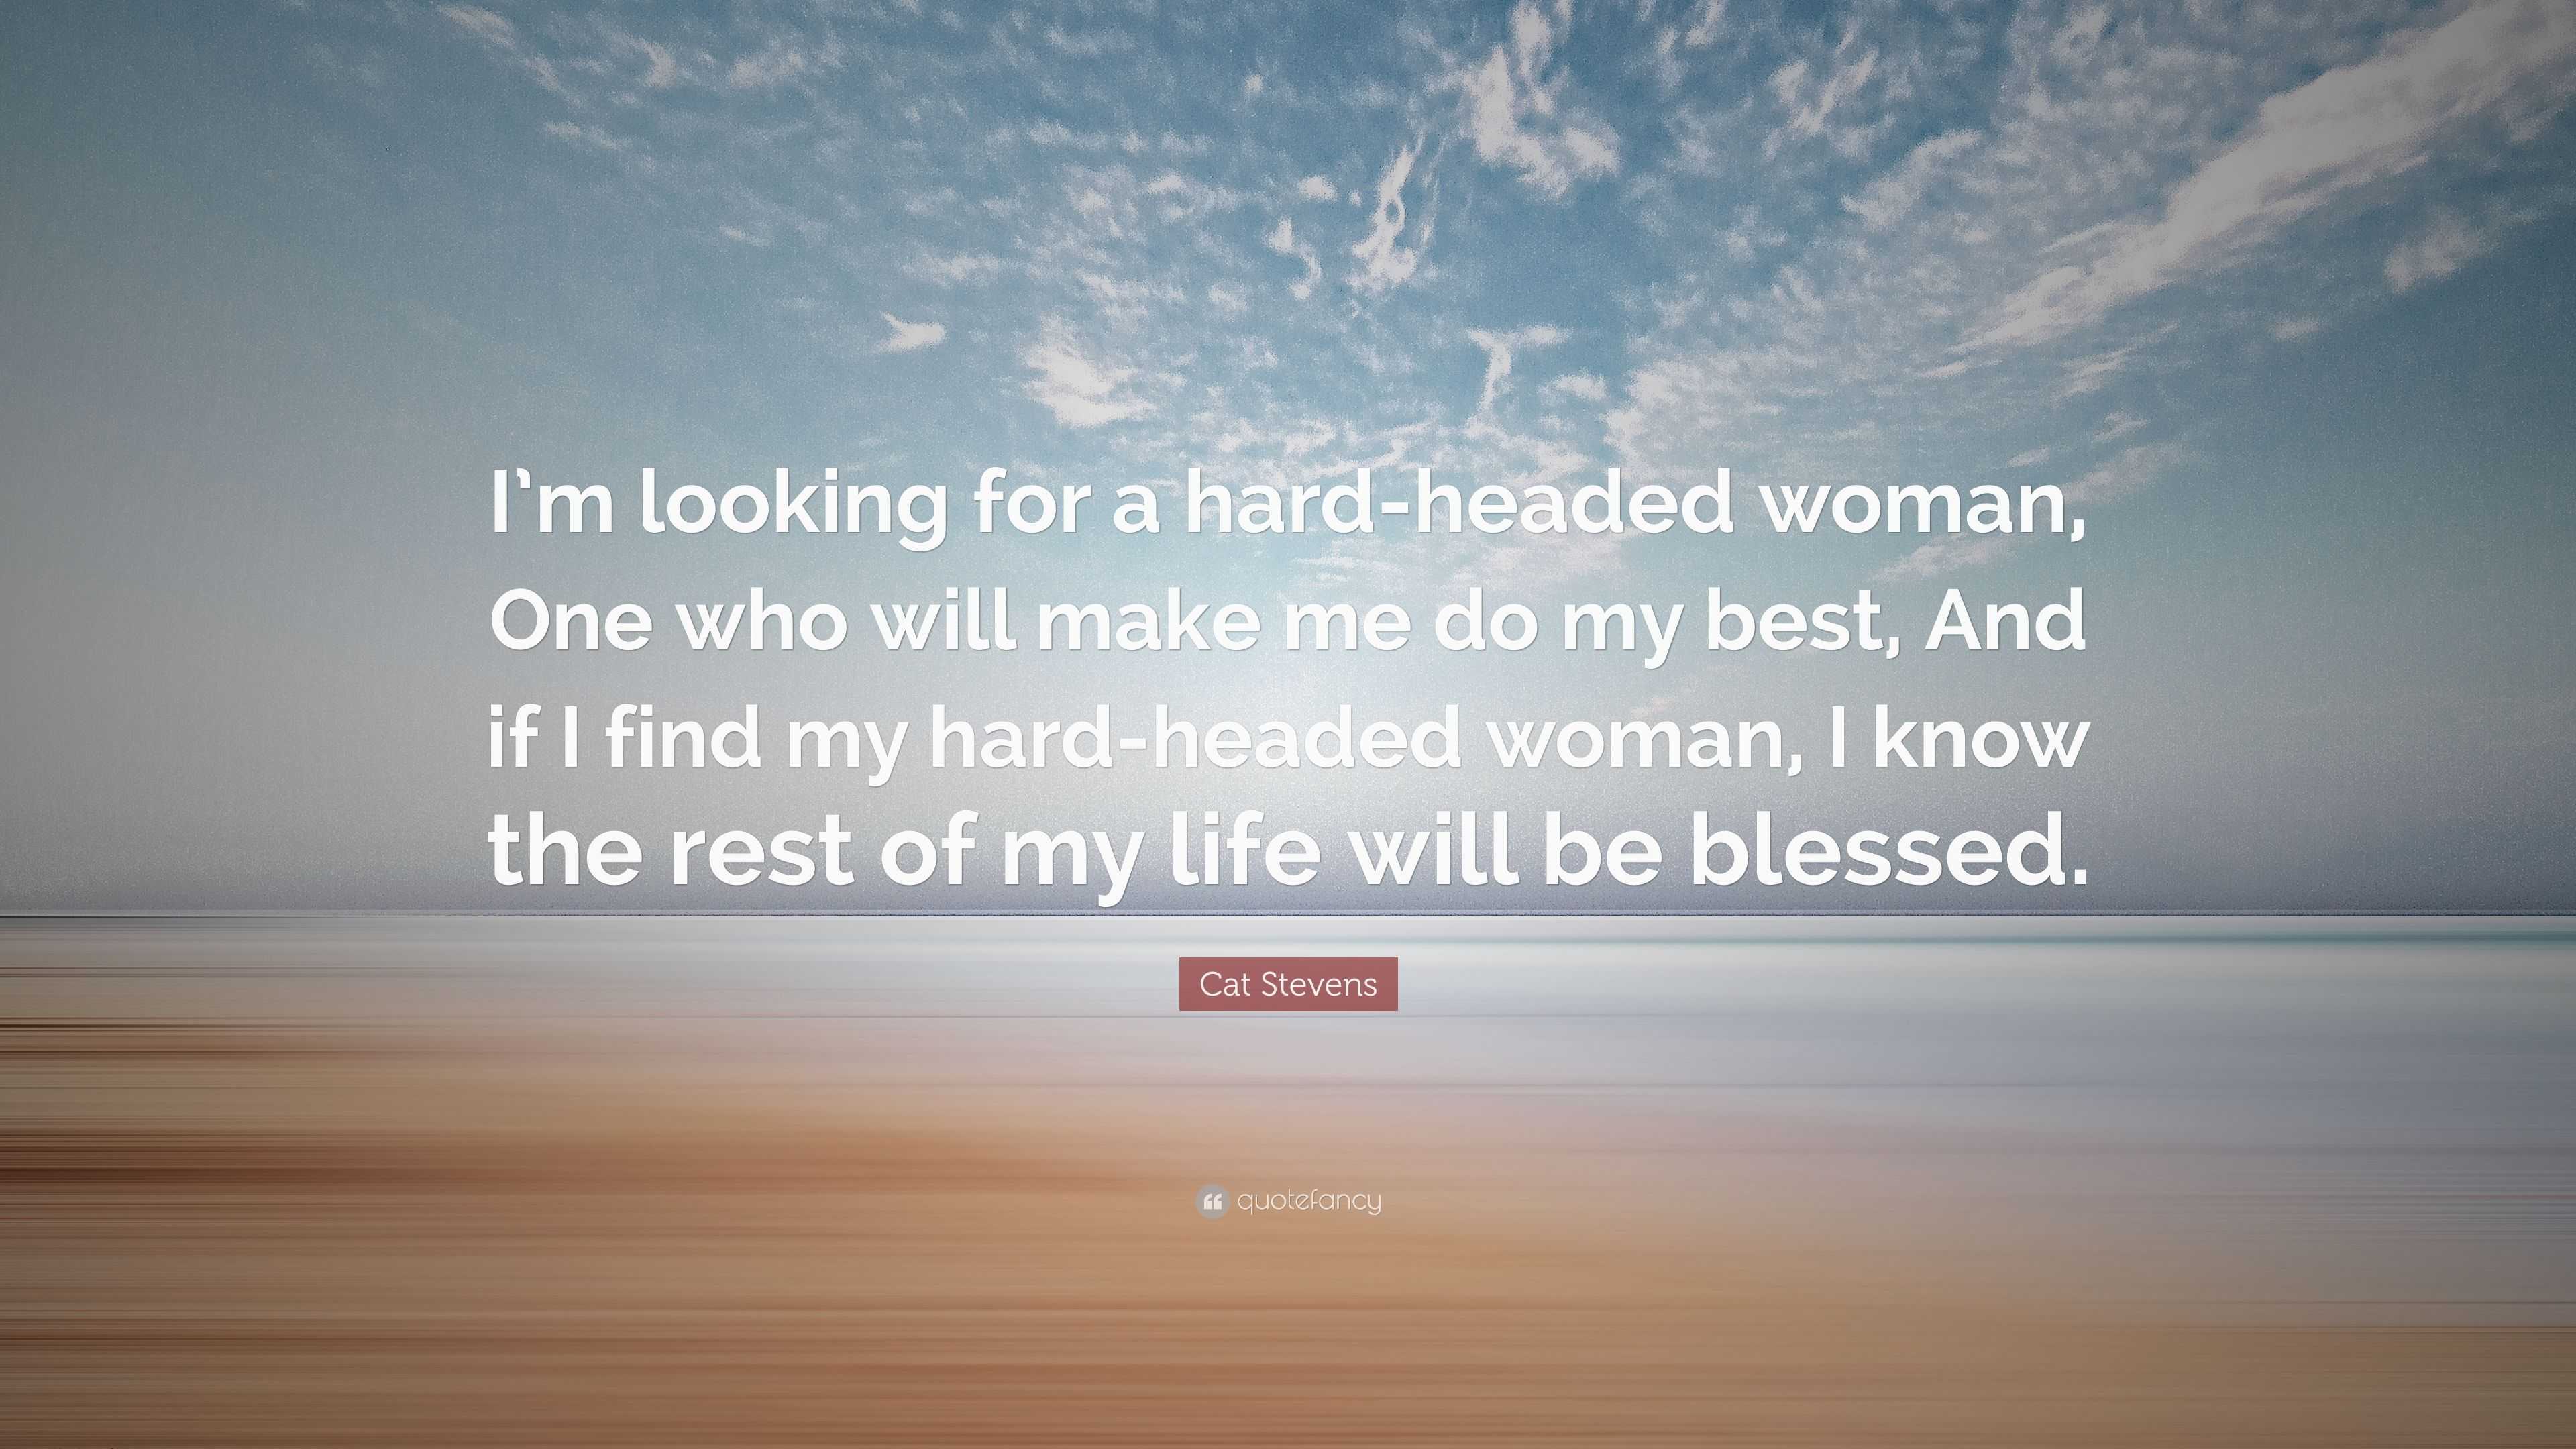 Cat Stevens Quote I M Looking For A Hard Headed Woman One Who Will Make Me Do My Best And If I Find My Hard Headed Woman I Know The Res